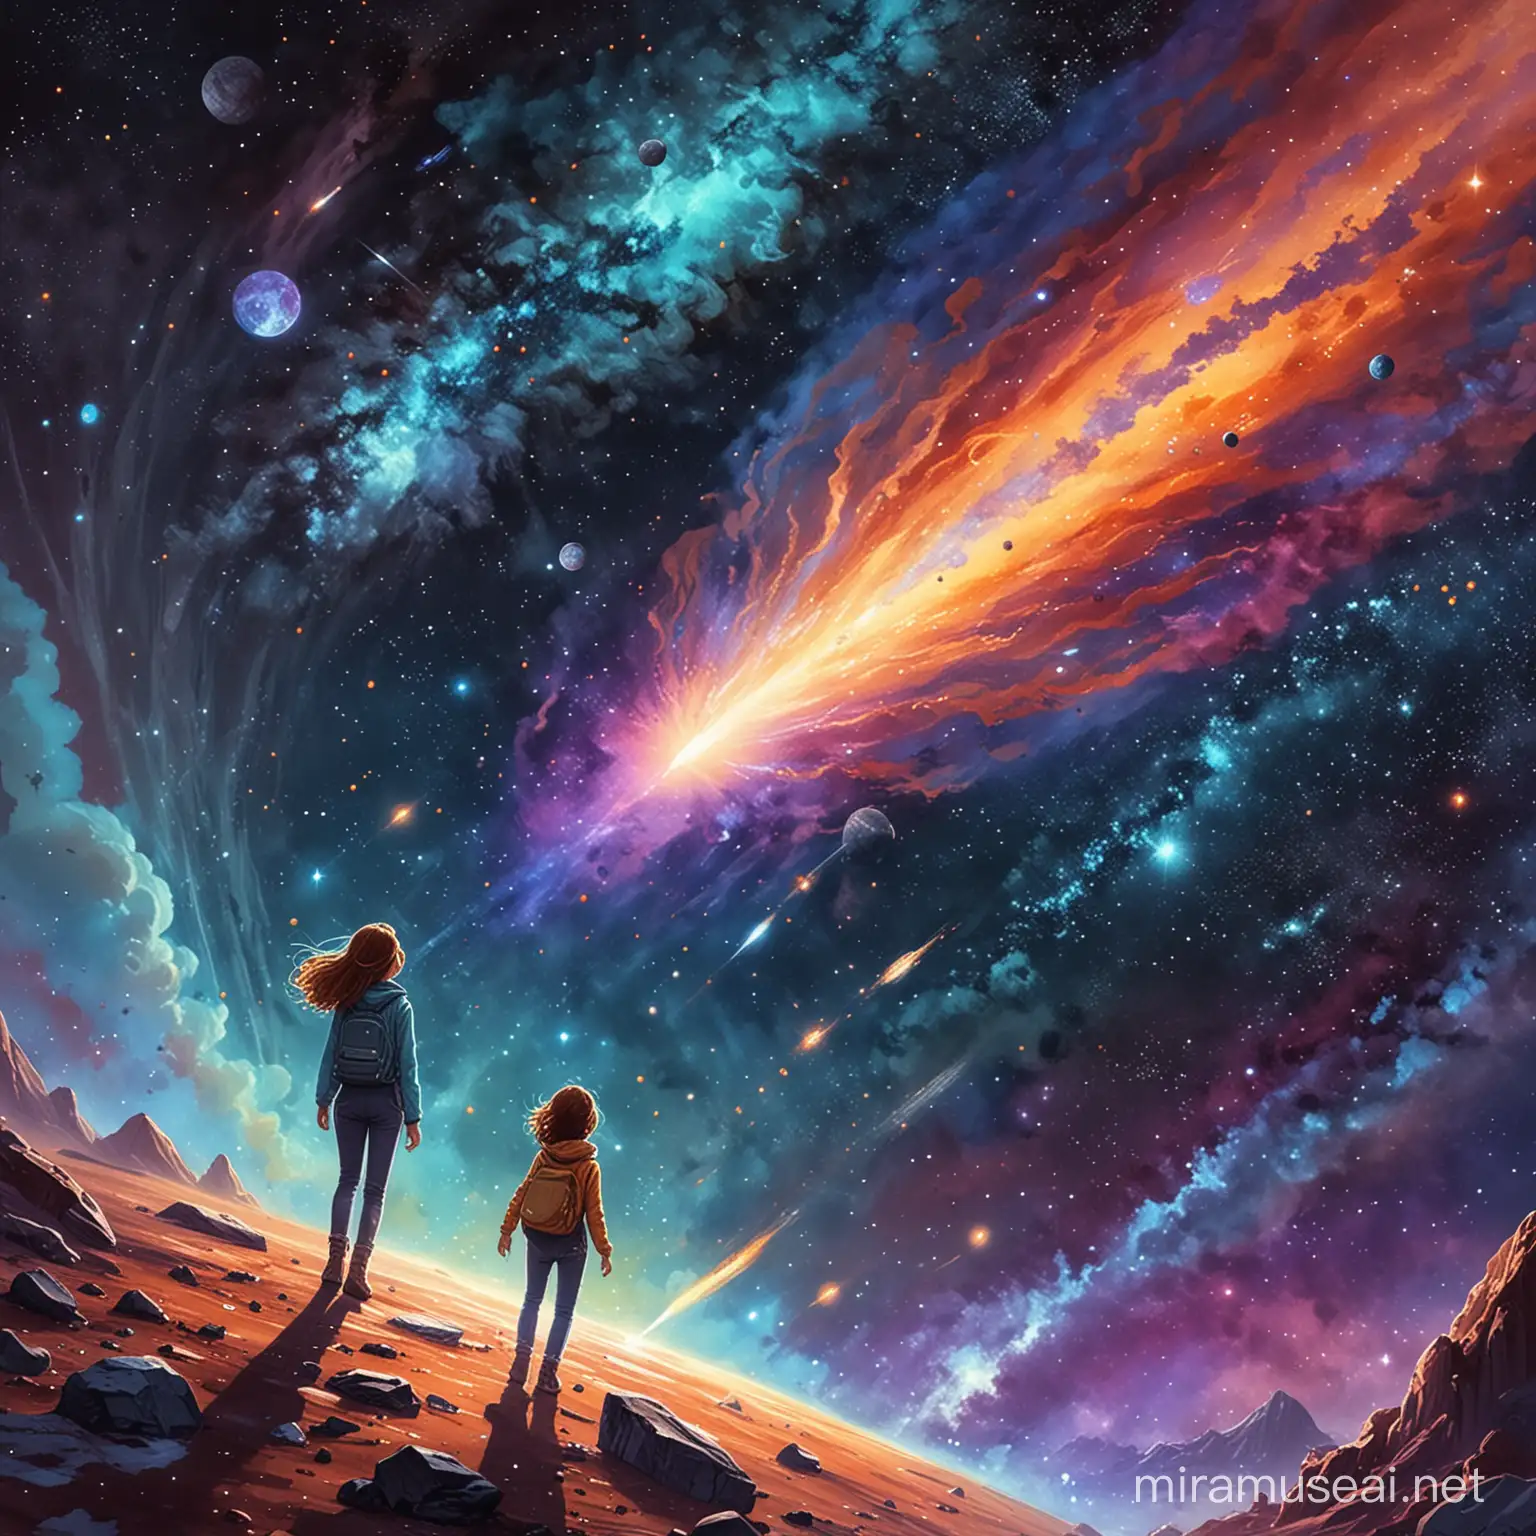 Create an illustration depicting Stella, Comet, and Nebula embarking on their cosmic journey through the universe. Show them soaring among colorful nebulae, navigating through asteroid fields, and gazing in wonder at distant galaxies. Capture the sense of adventure, friendship, and wonder described in the story